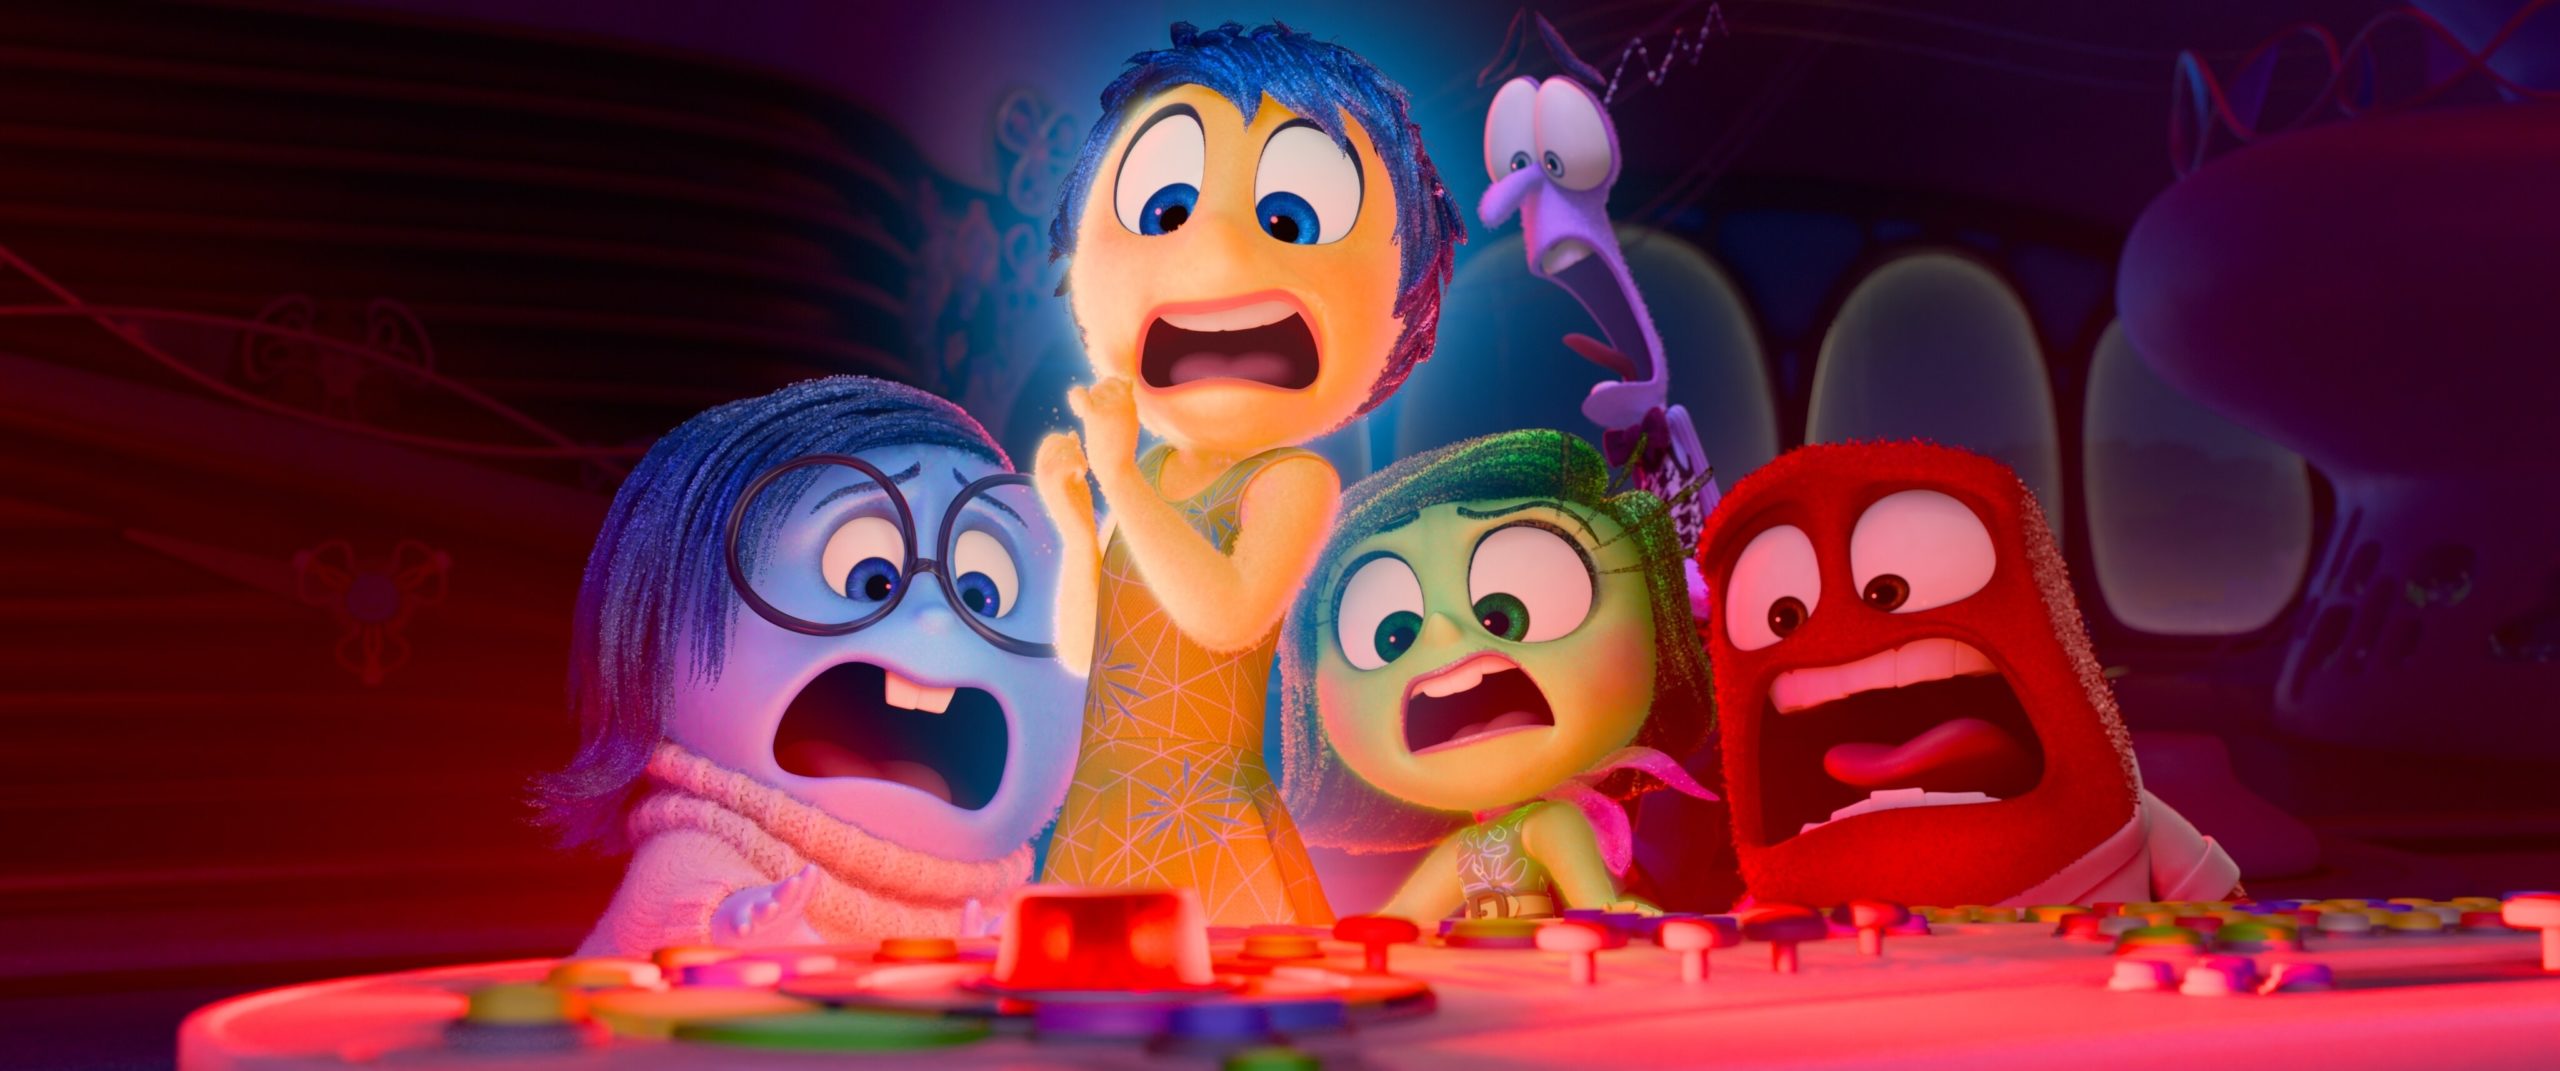 The emotions discover the Puberty button in Inside Out 2.